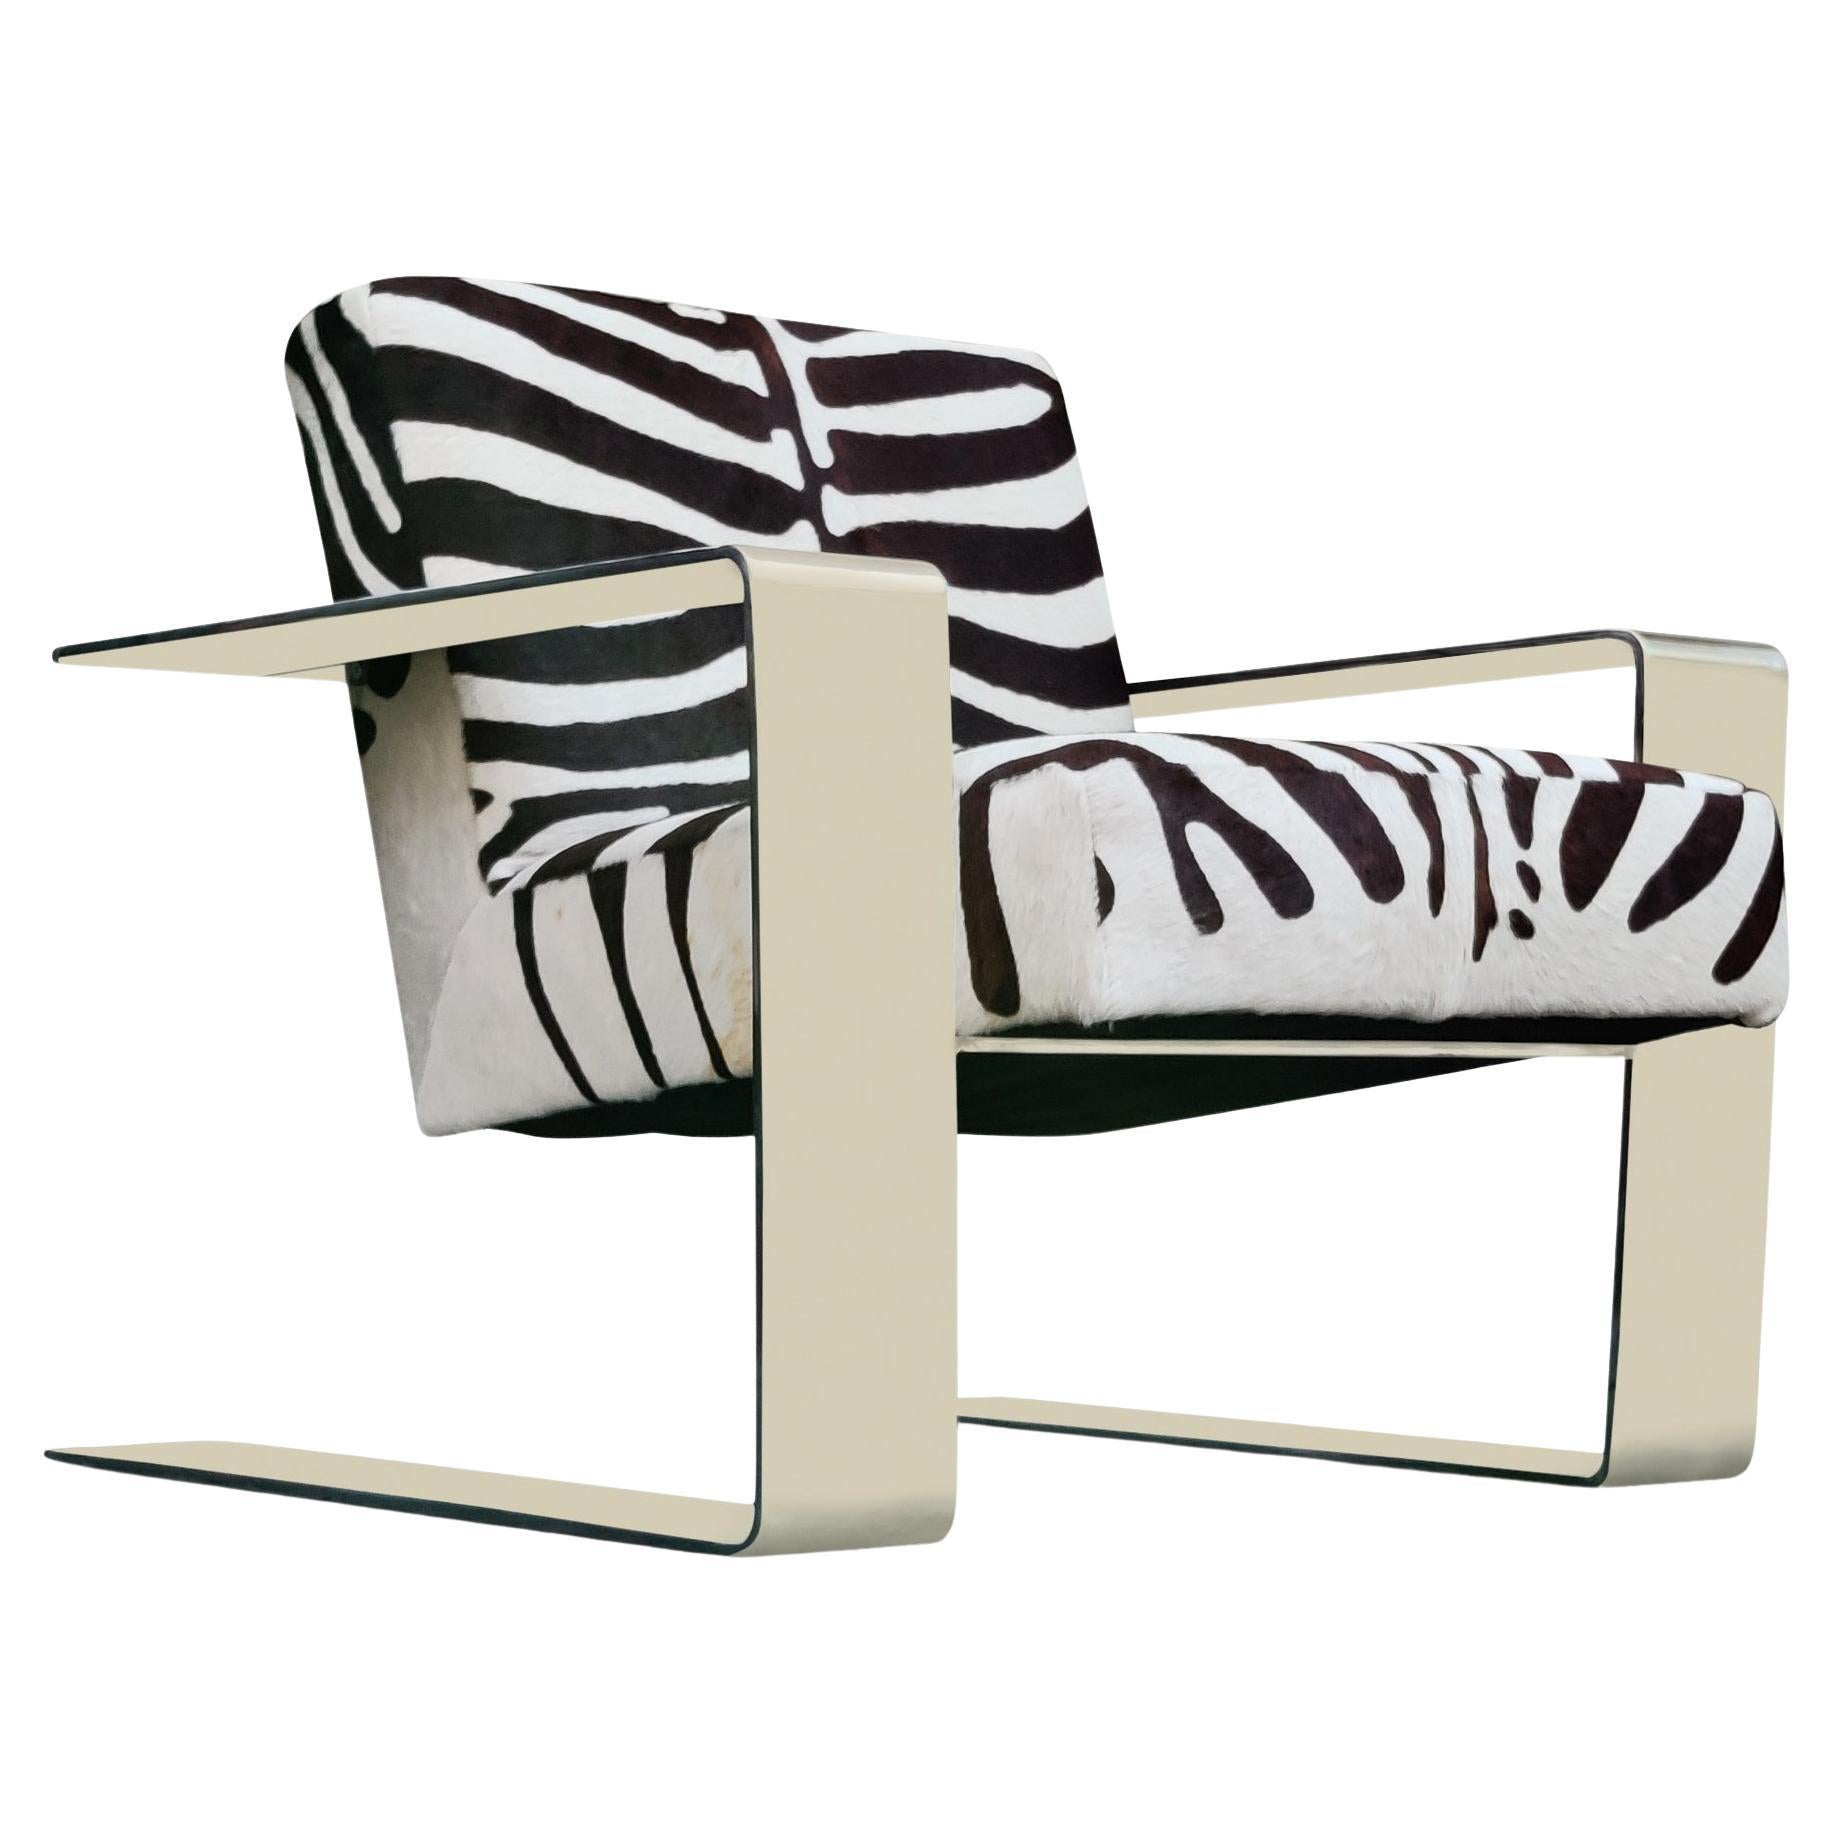 Bernhardt Connor Lounge Chair Chrome Frame Zebra Print Cowhide Upholstery For Sale